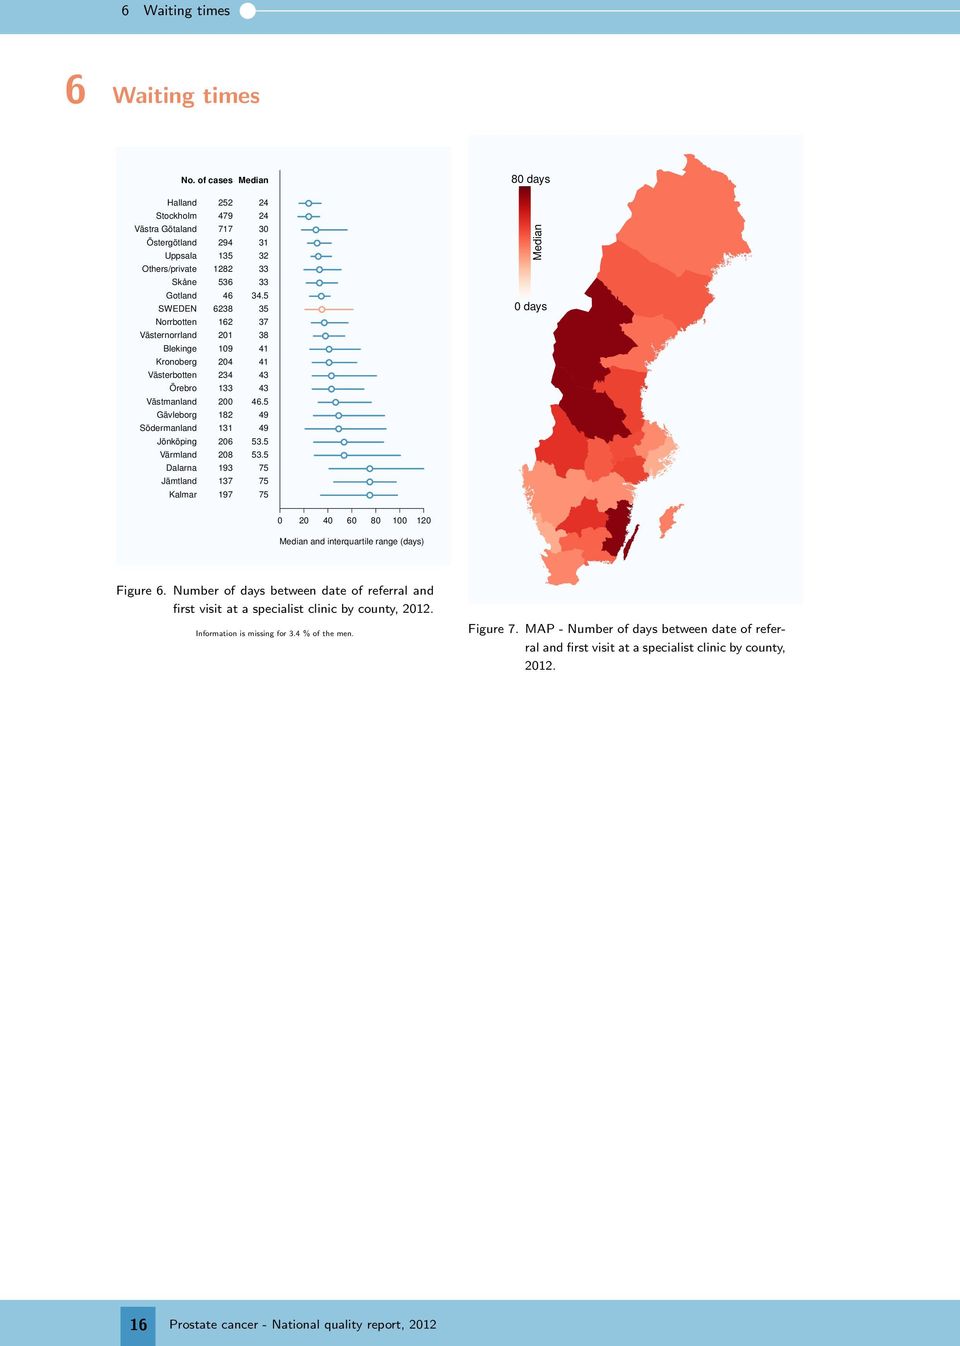 4 4 3. 3. Median days 4 1 Median and interquartile range (days) Figure. Number of days between date of referral and first visit at a specialist clinic by county,.